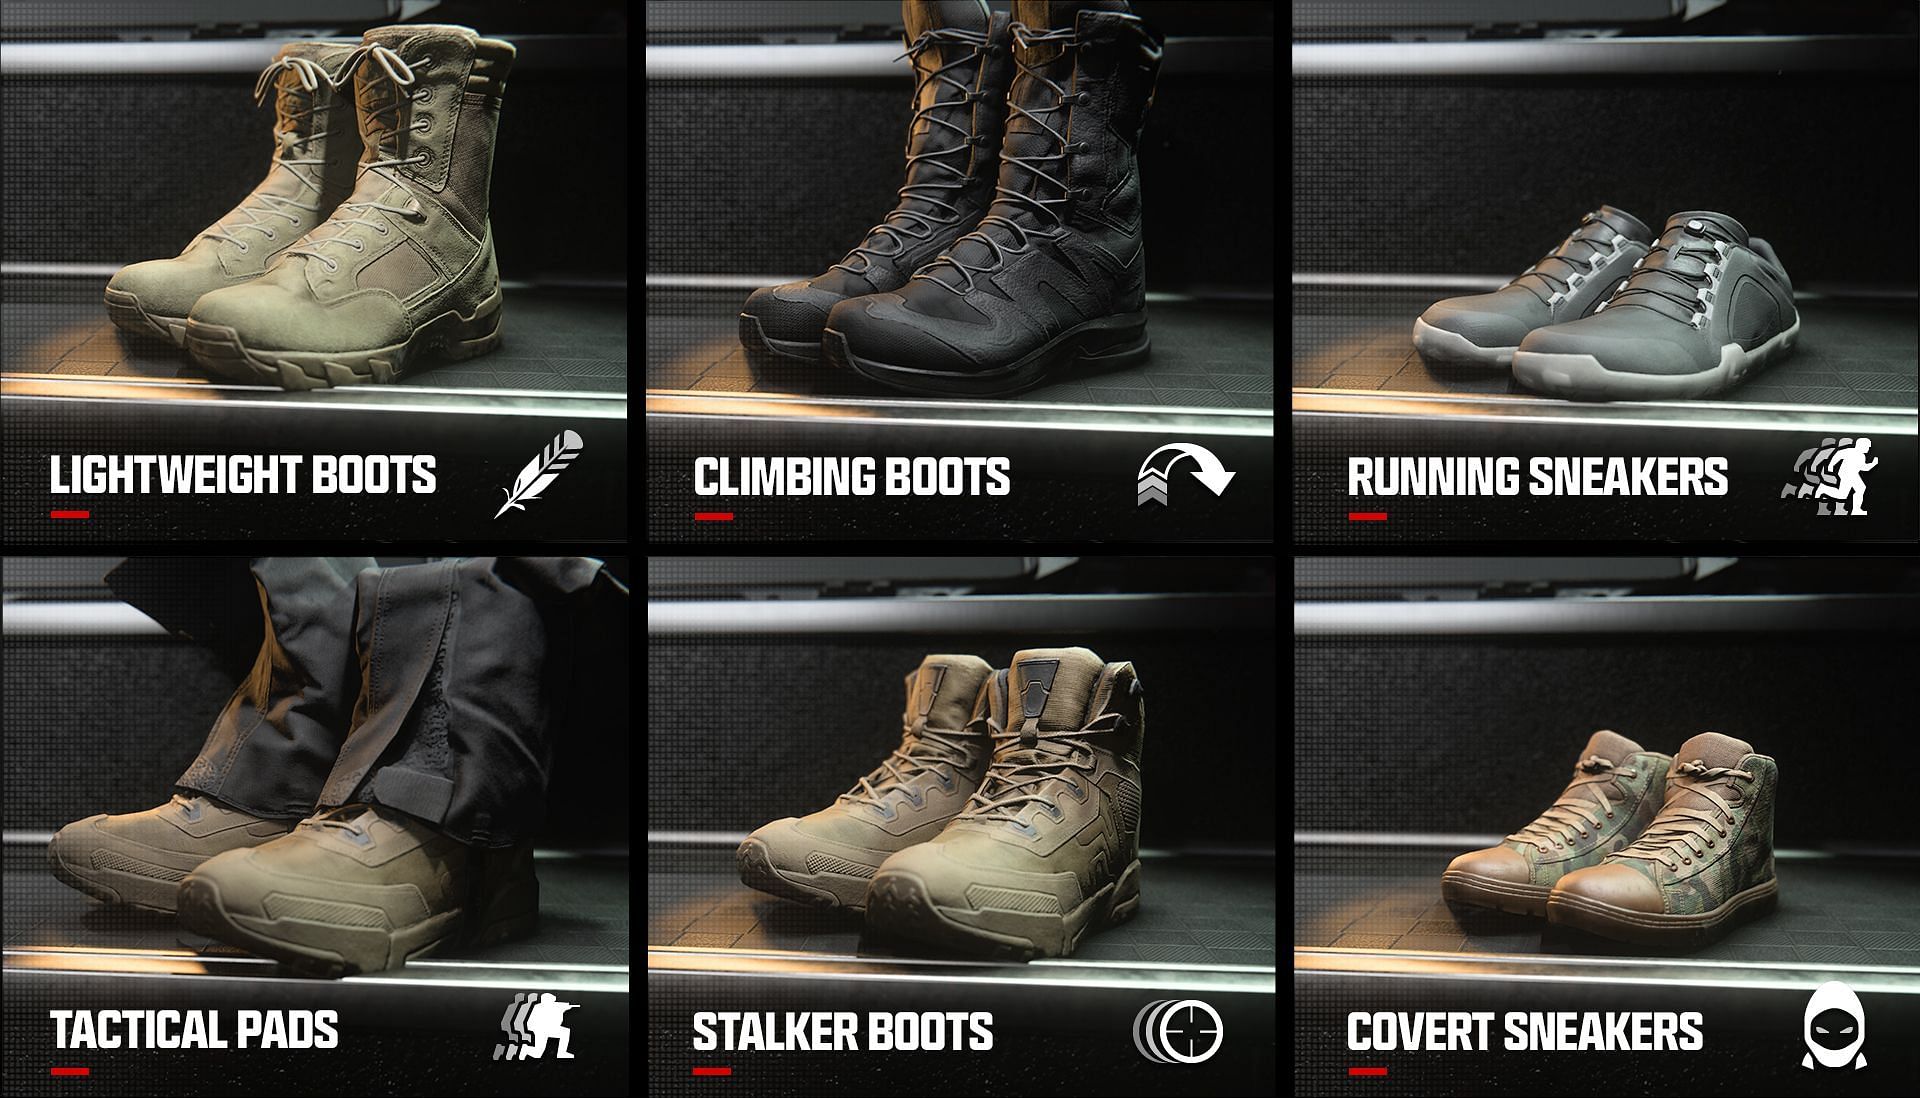 The Boot Perks of MW3 (Image via Activision)